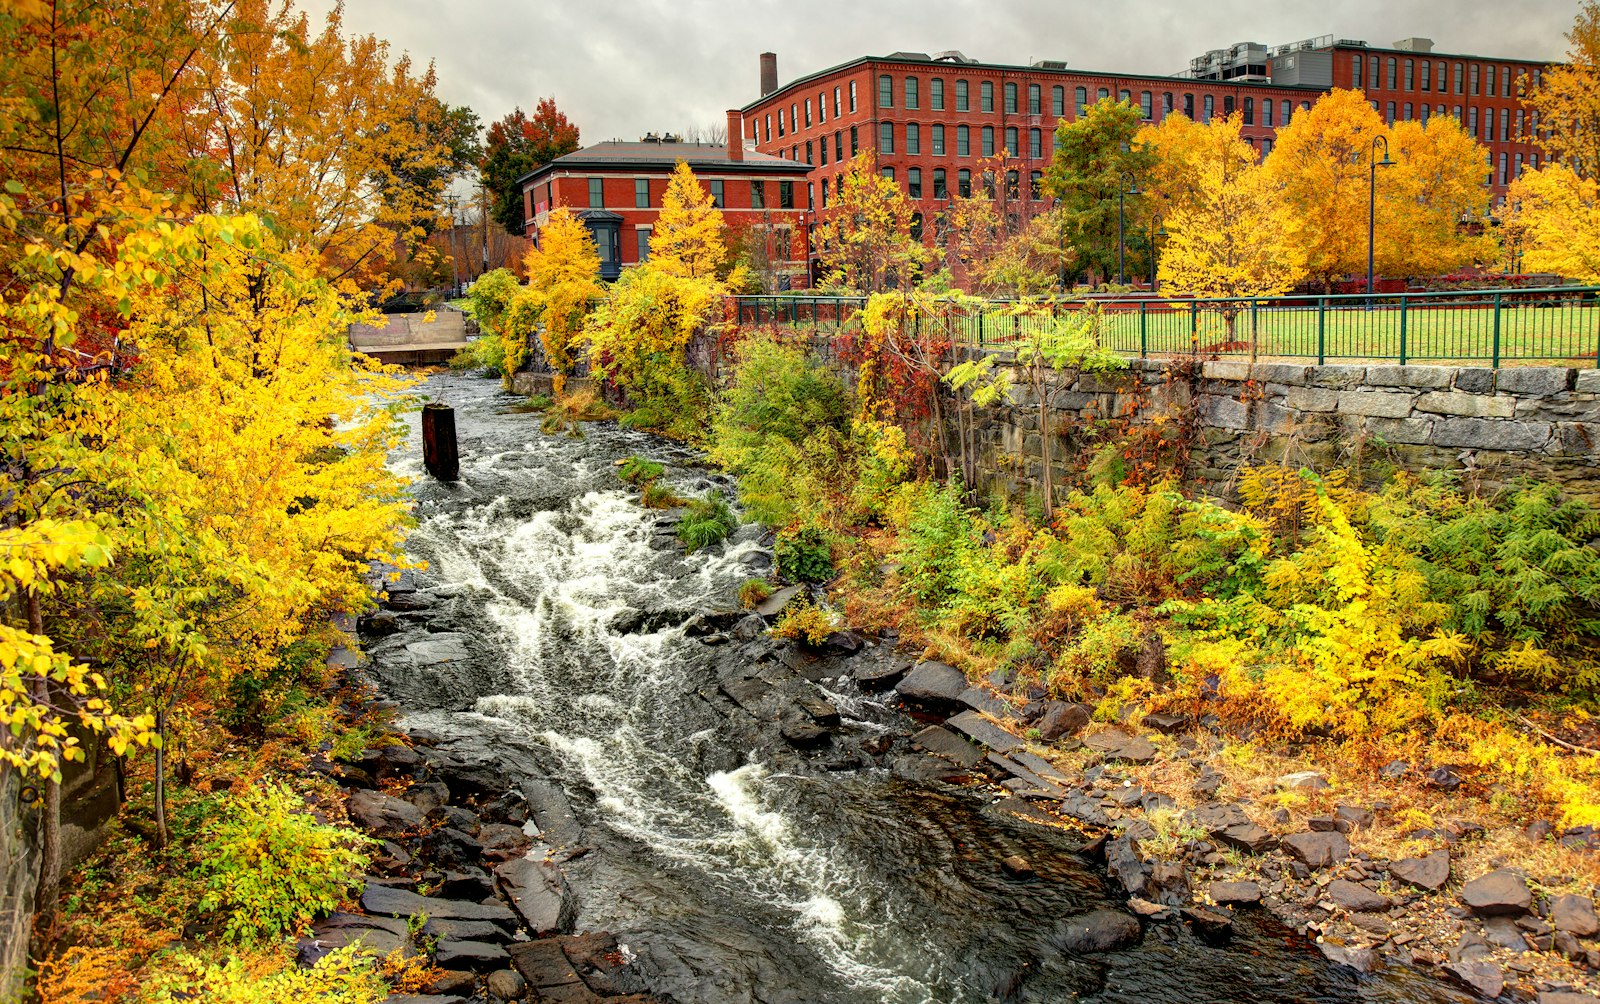 A small waterfall and stream rush along rocks, surrounded by orange, red, and yellow foliage. In the distance is a large red-brick building